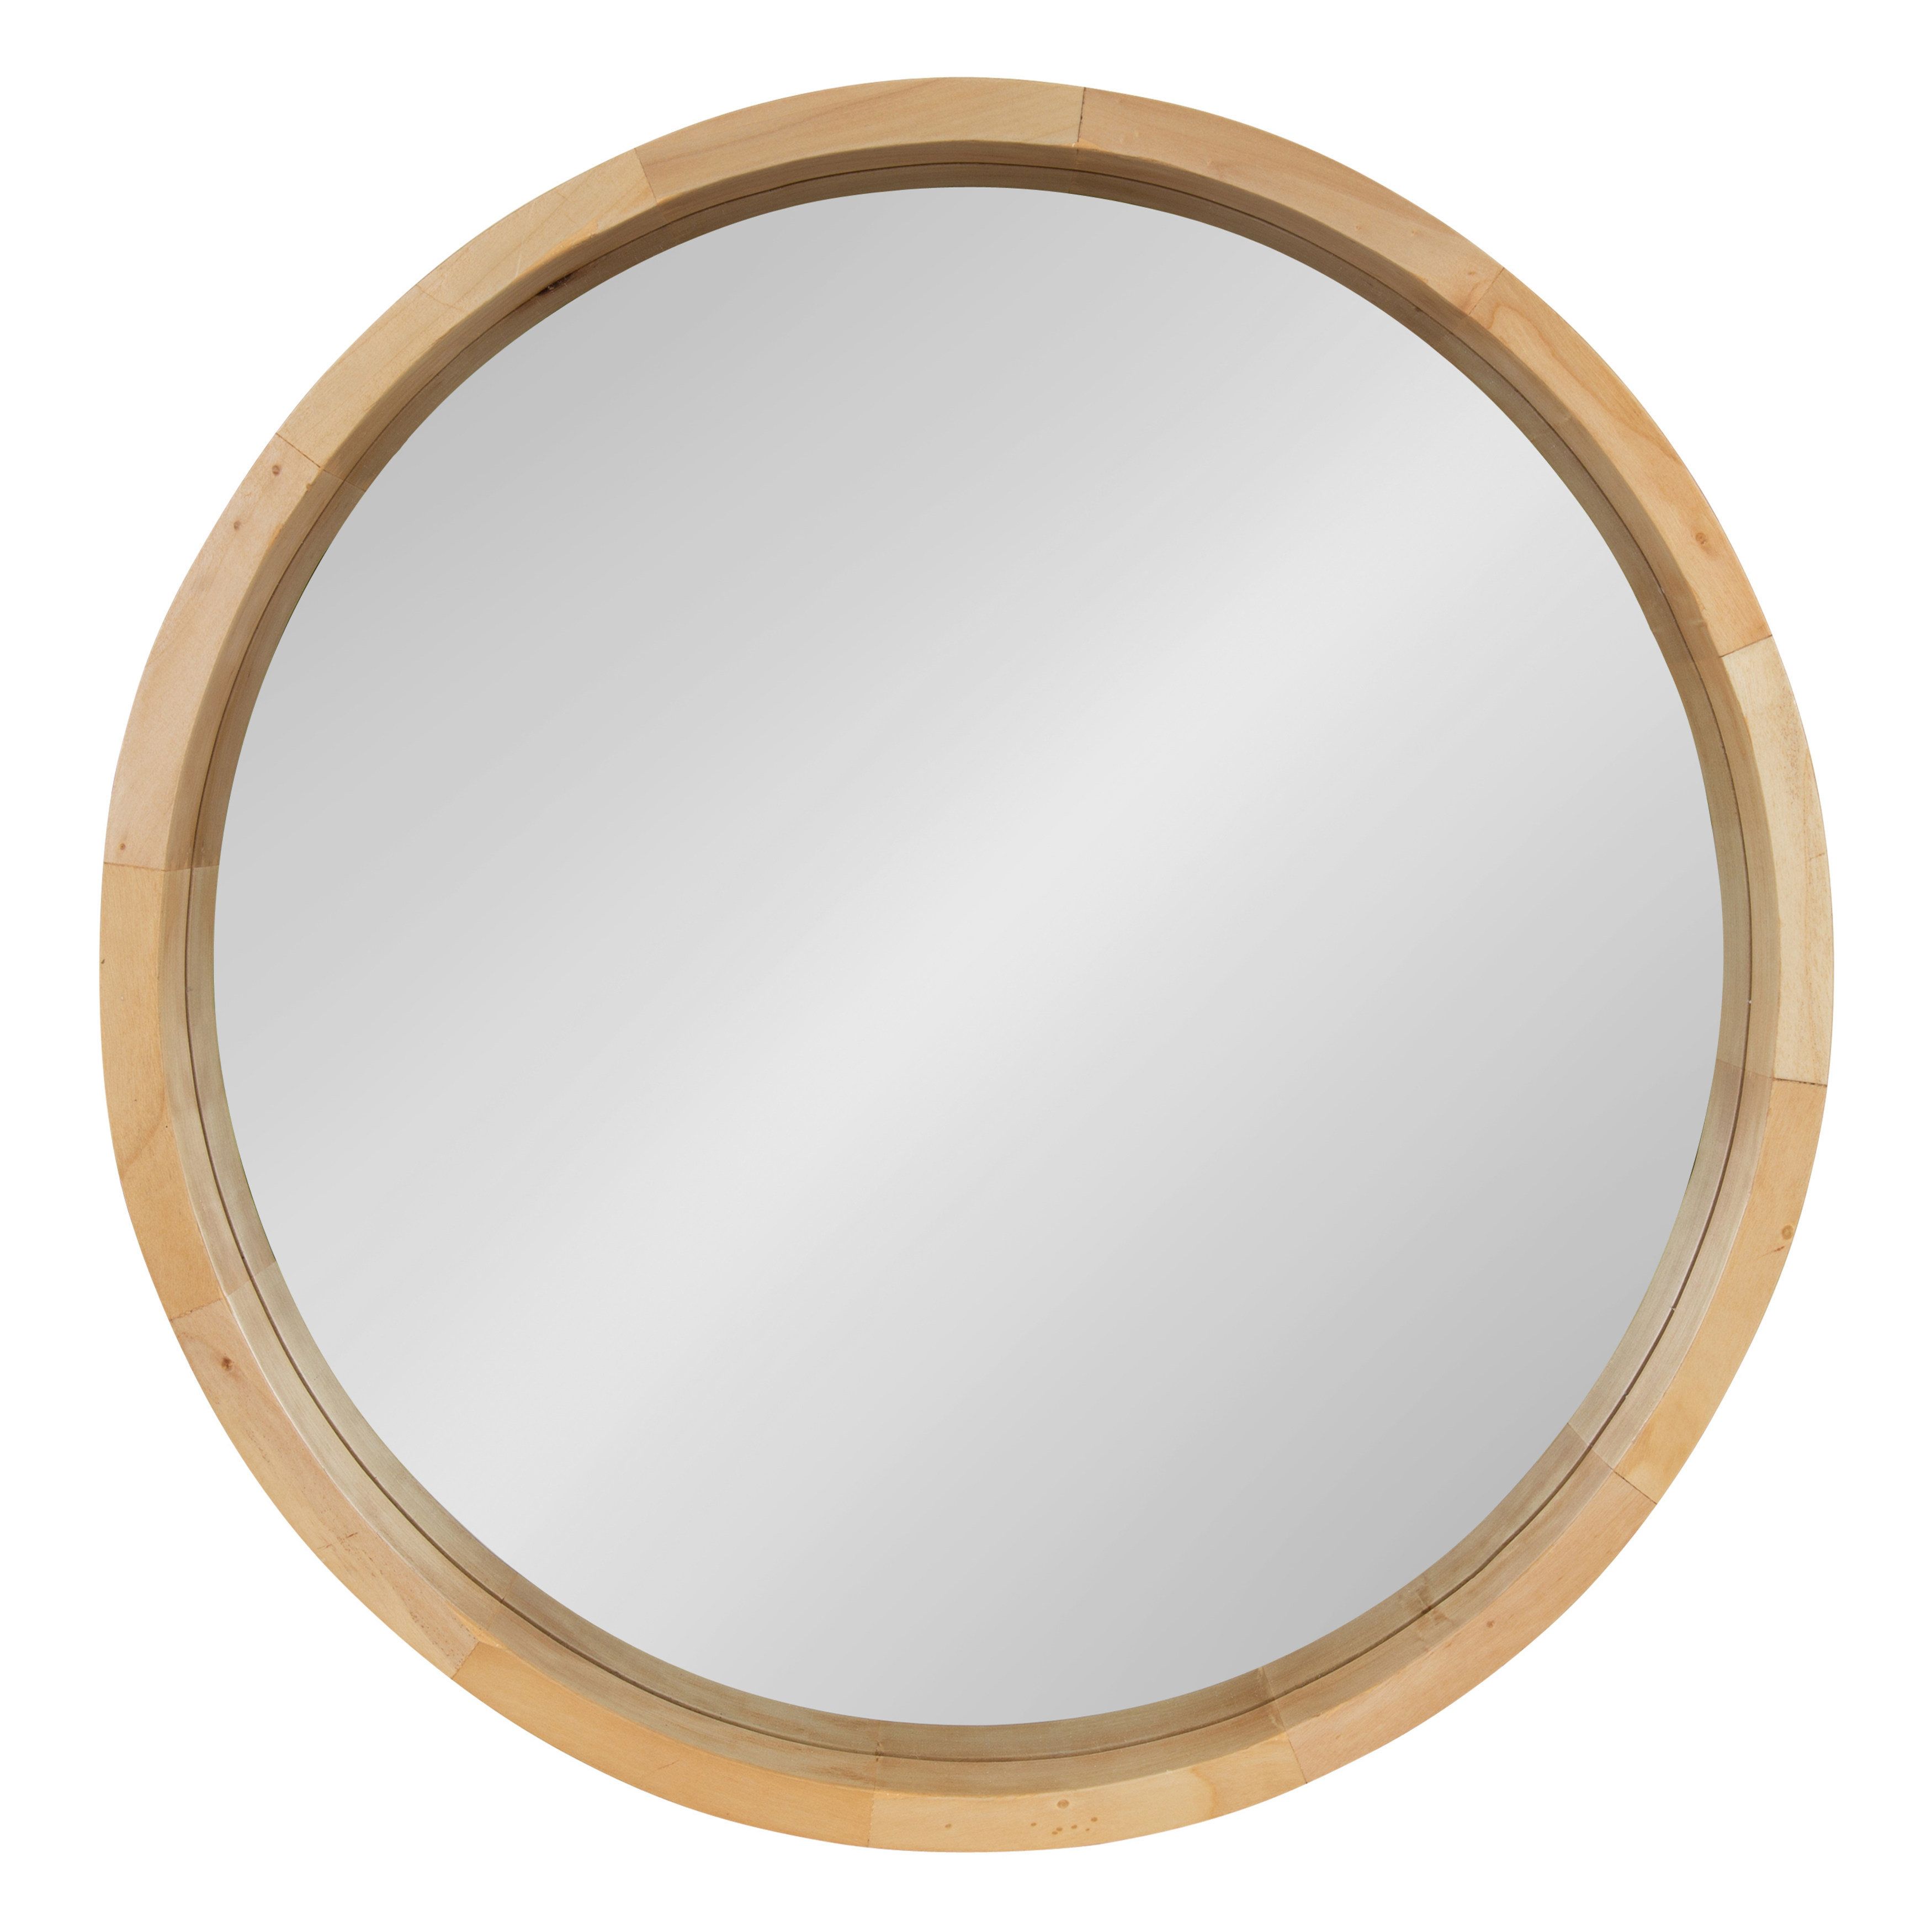 Round Wall Mounted Mirrors You'll Love In 2019 | Wayfair Intended For Celeste Frameless Round Wall Mirrors (View 17 of 20)